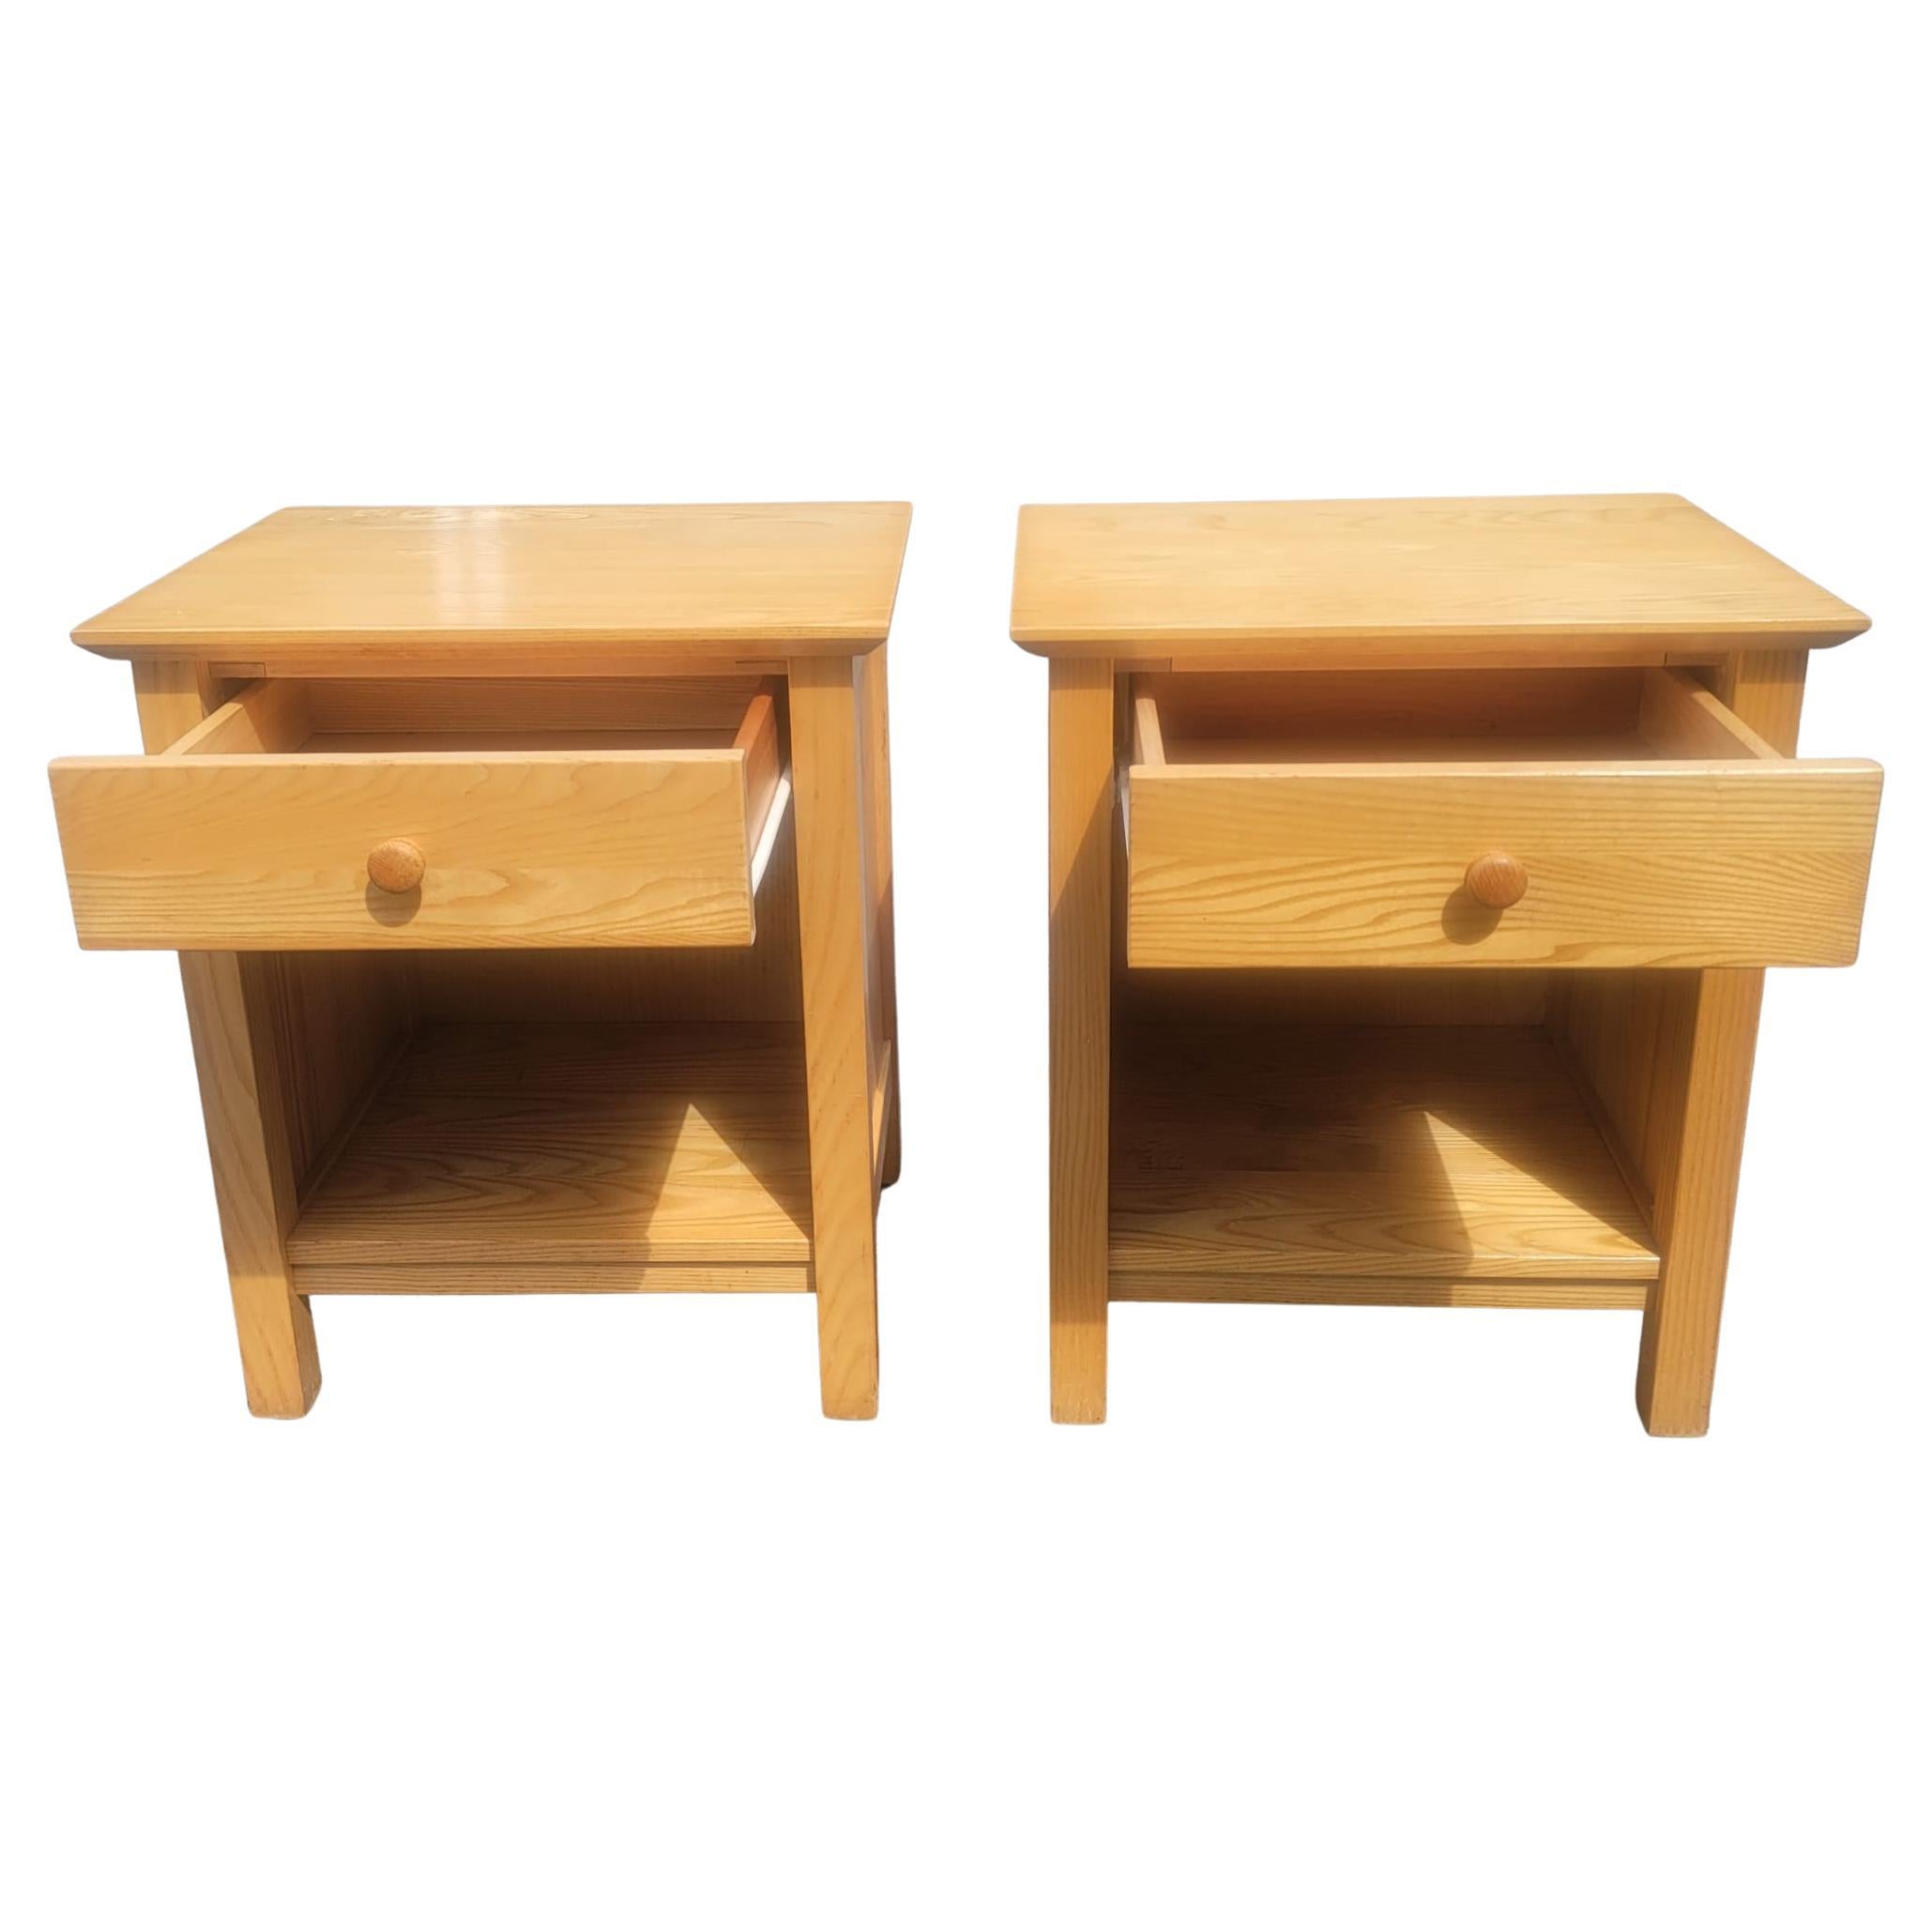 American Vermont Tubbs Solid Ash Wood Single Drawer Bedside Tables Nightstands, a Pair